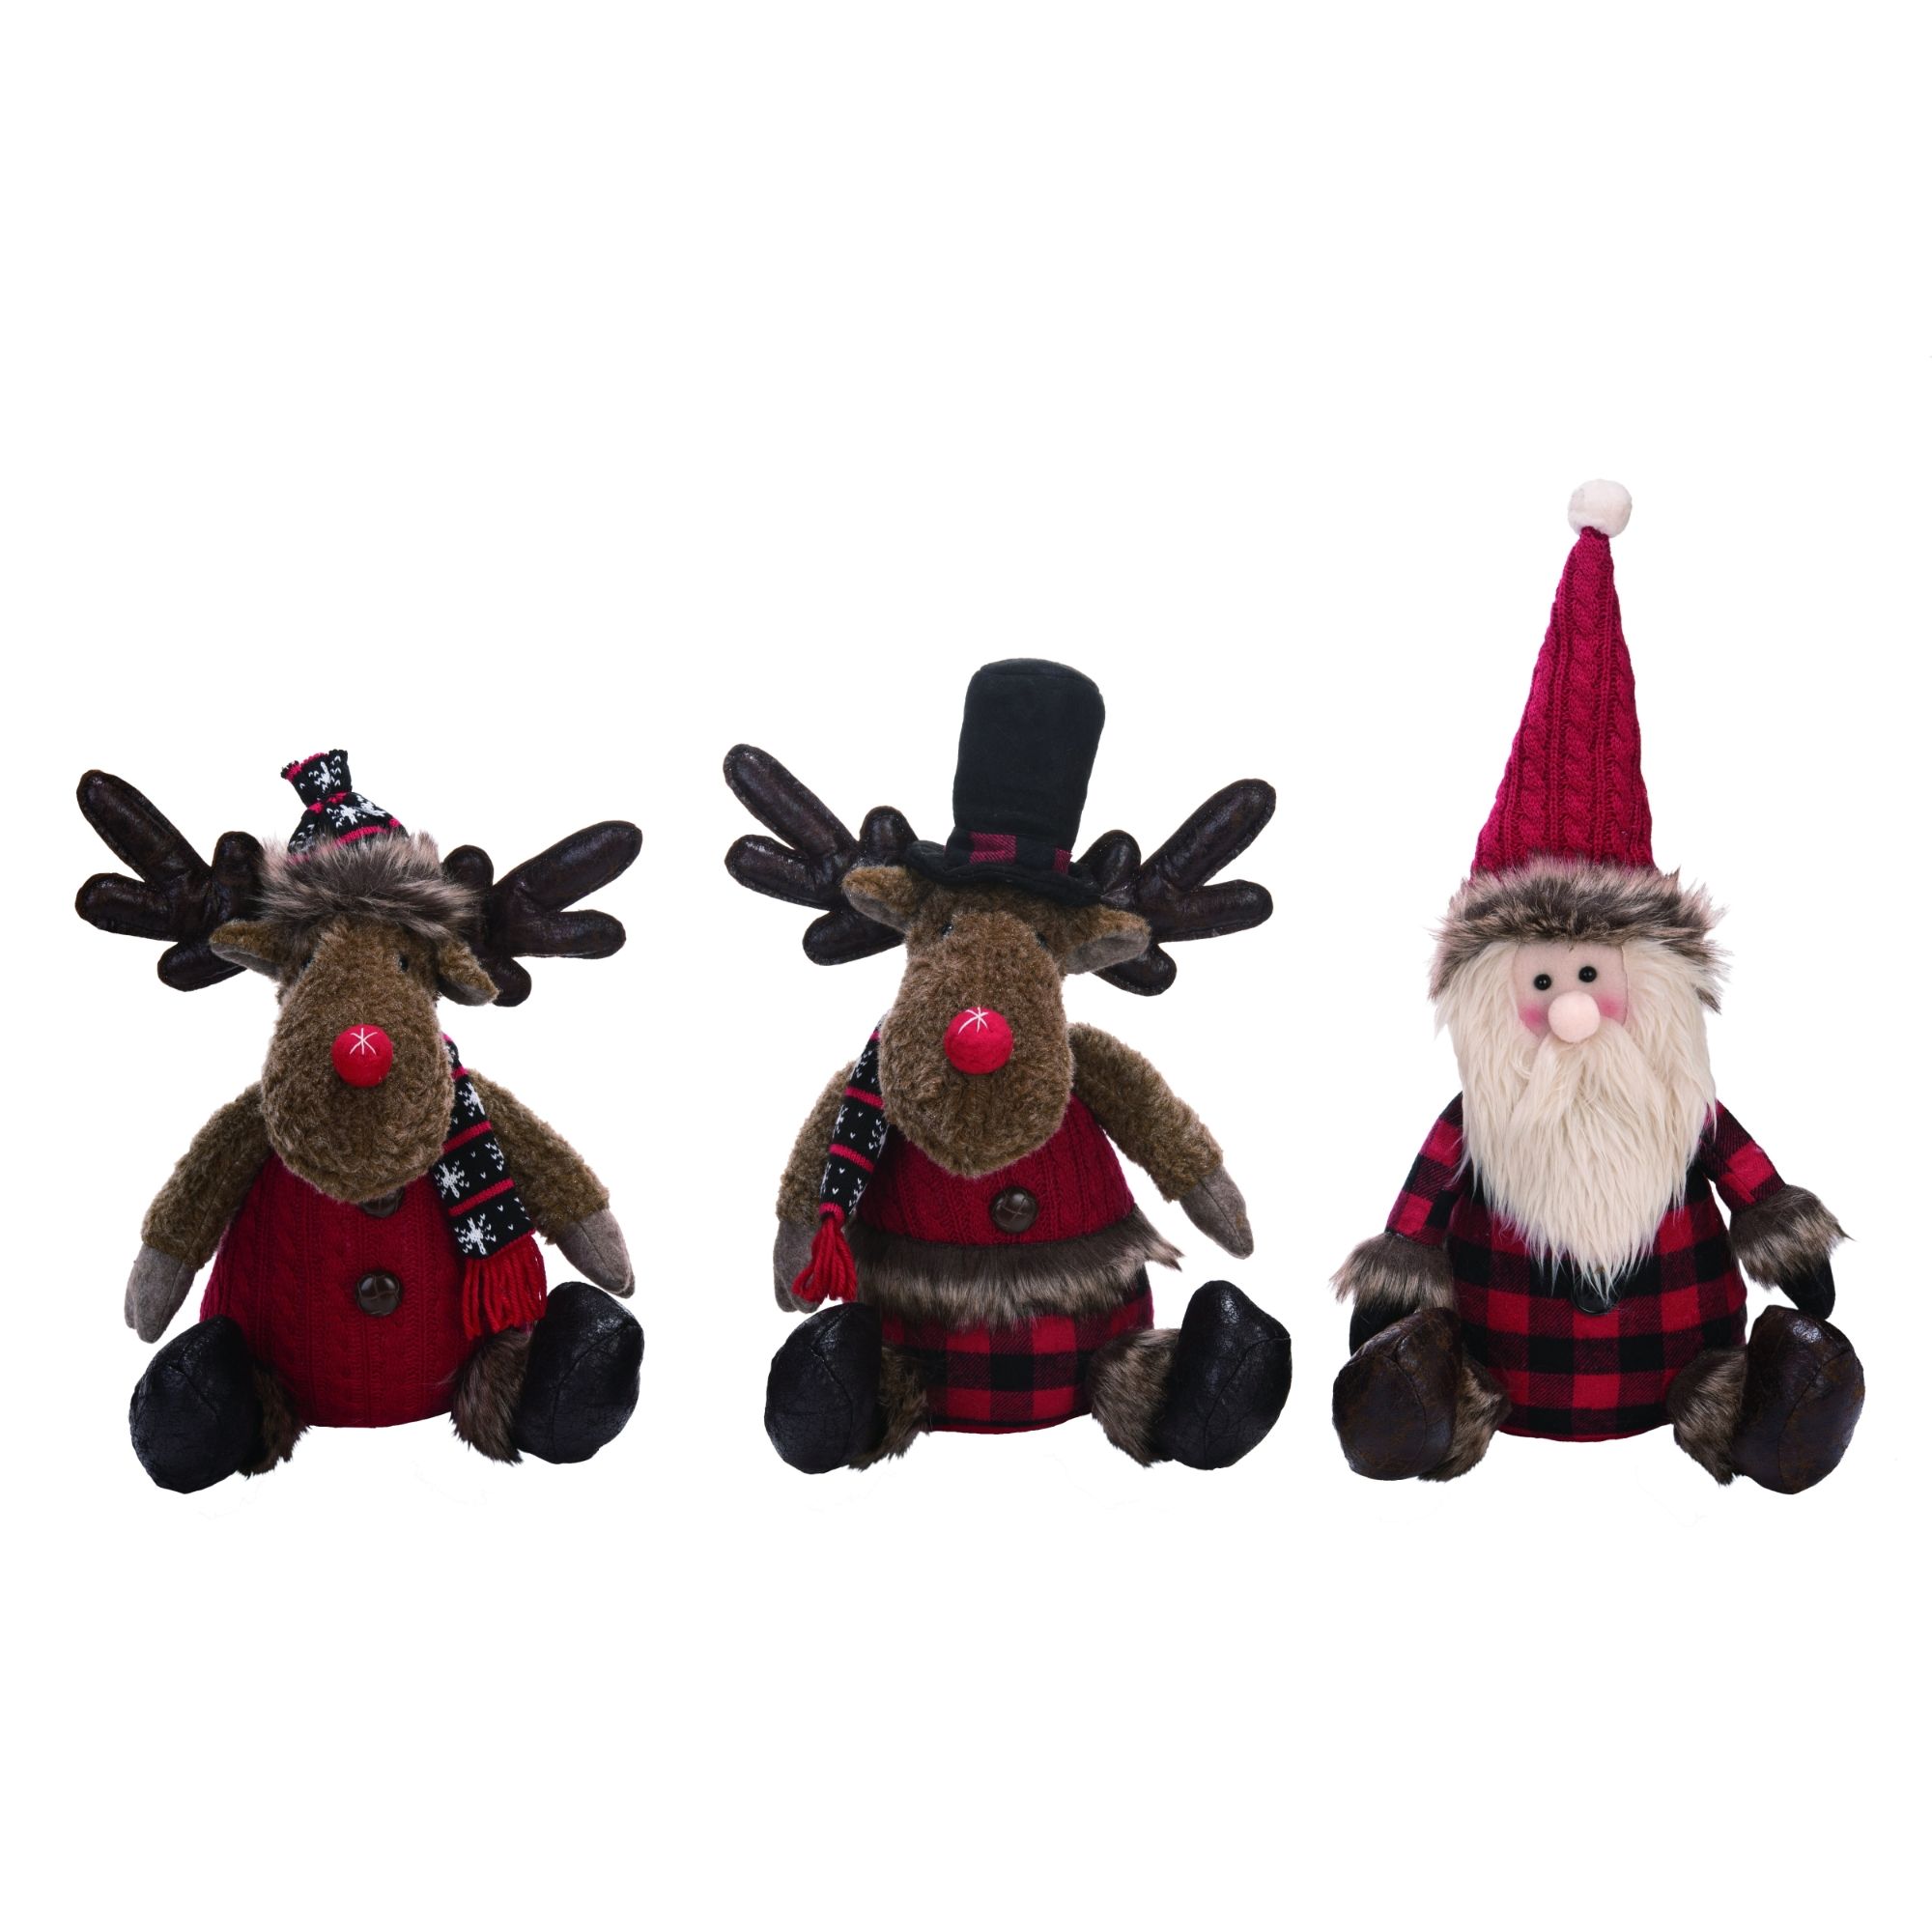 Contemporary Home Living Set of 3 Red and Black Plush Rustic Sitting Character Christmas Decor 13"